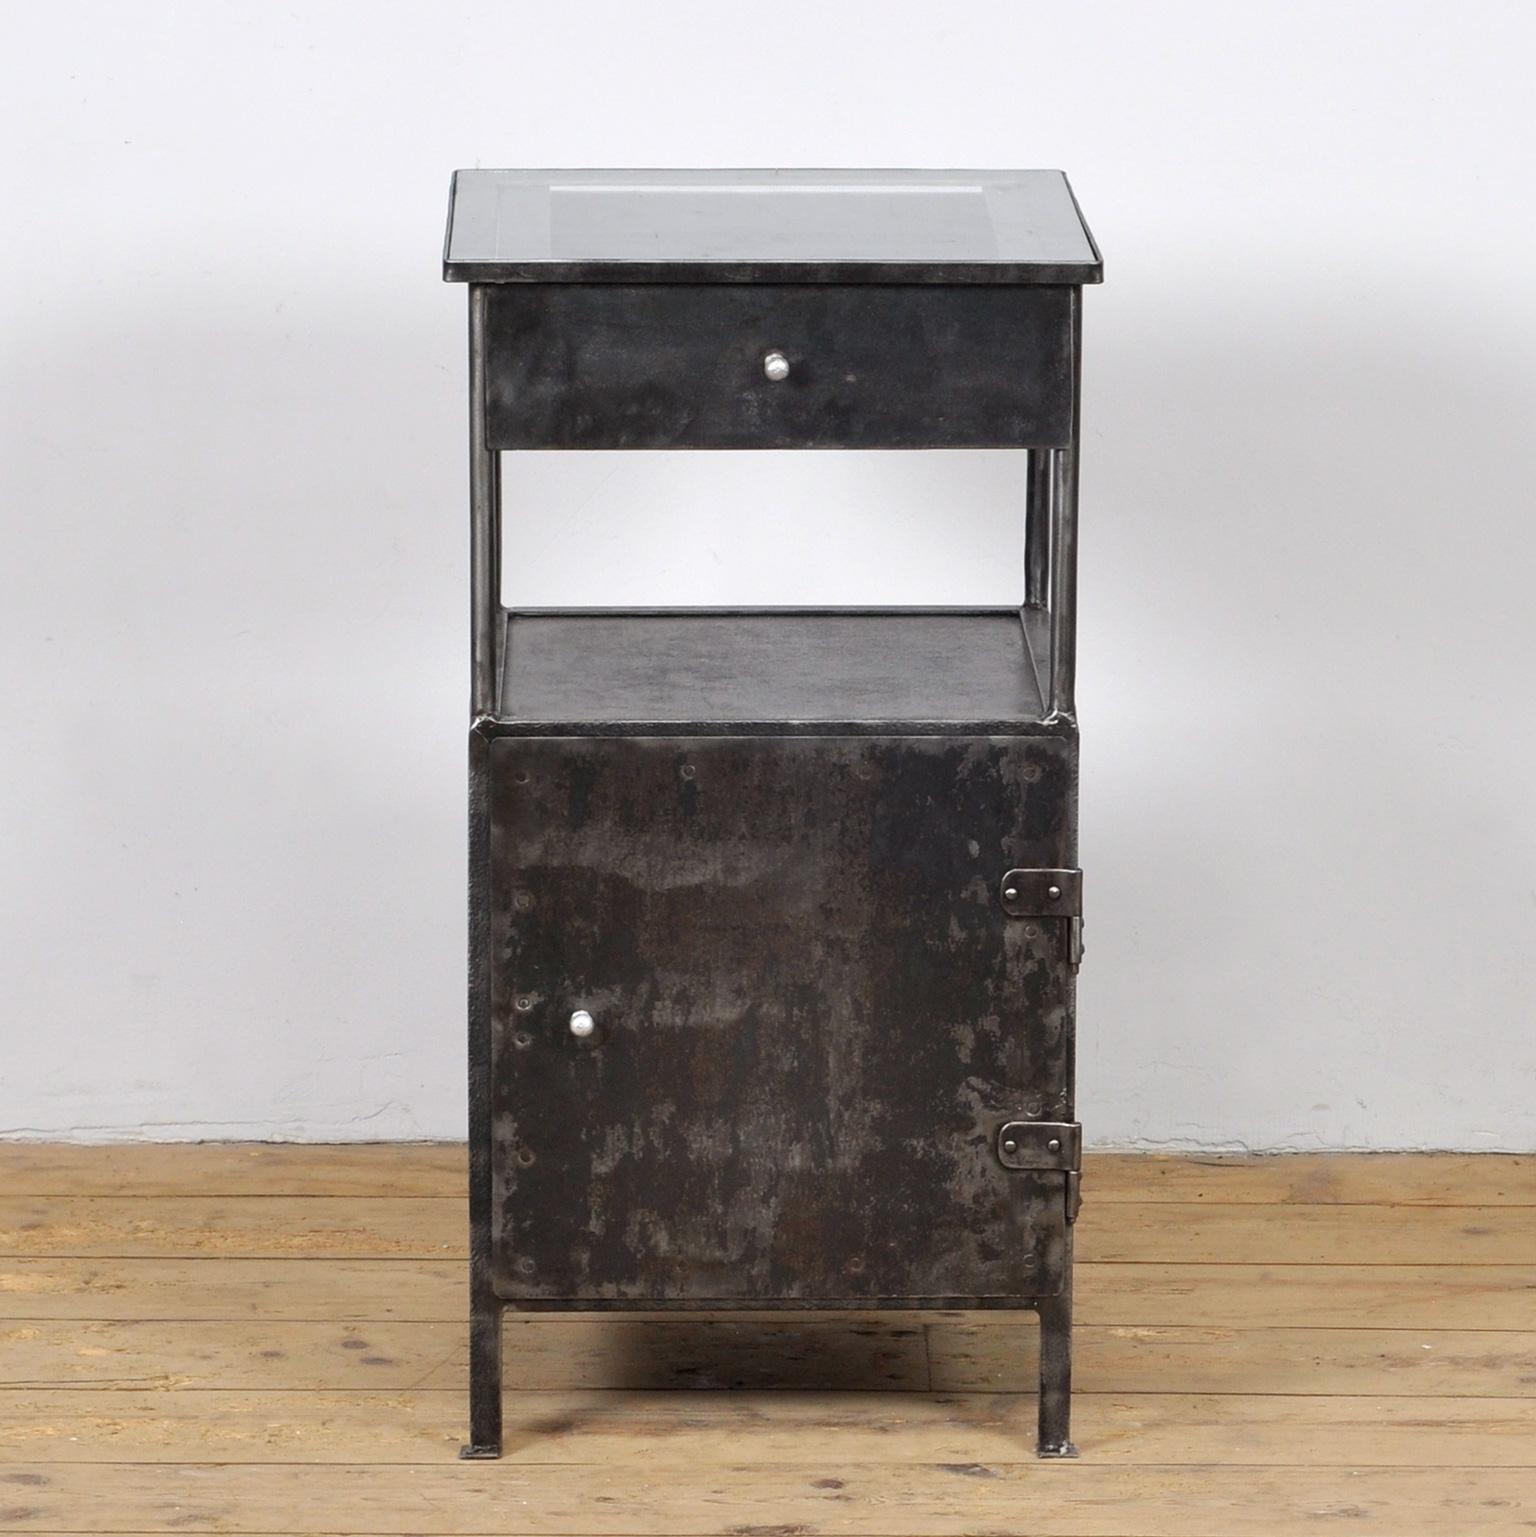 Iron hospital bedside table with a glass top. The item has been stripped from its paint. Treated against rust. Circa 1910. 